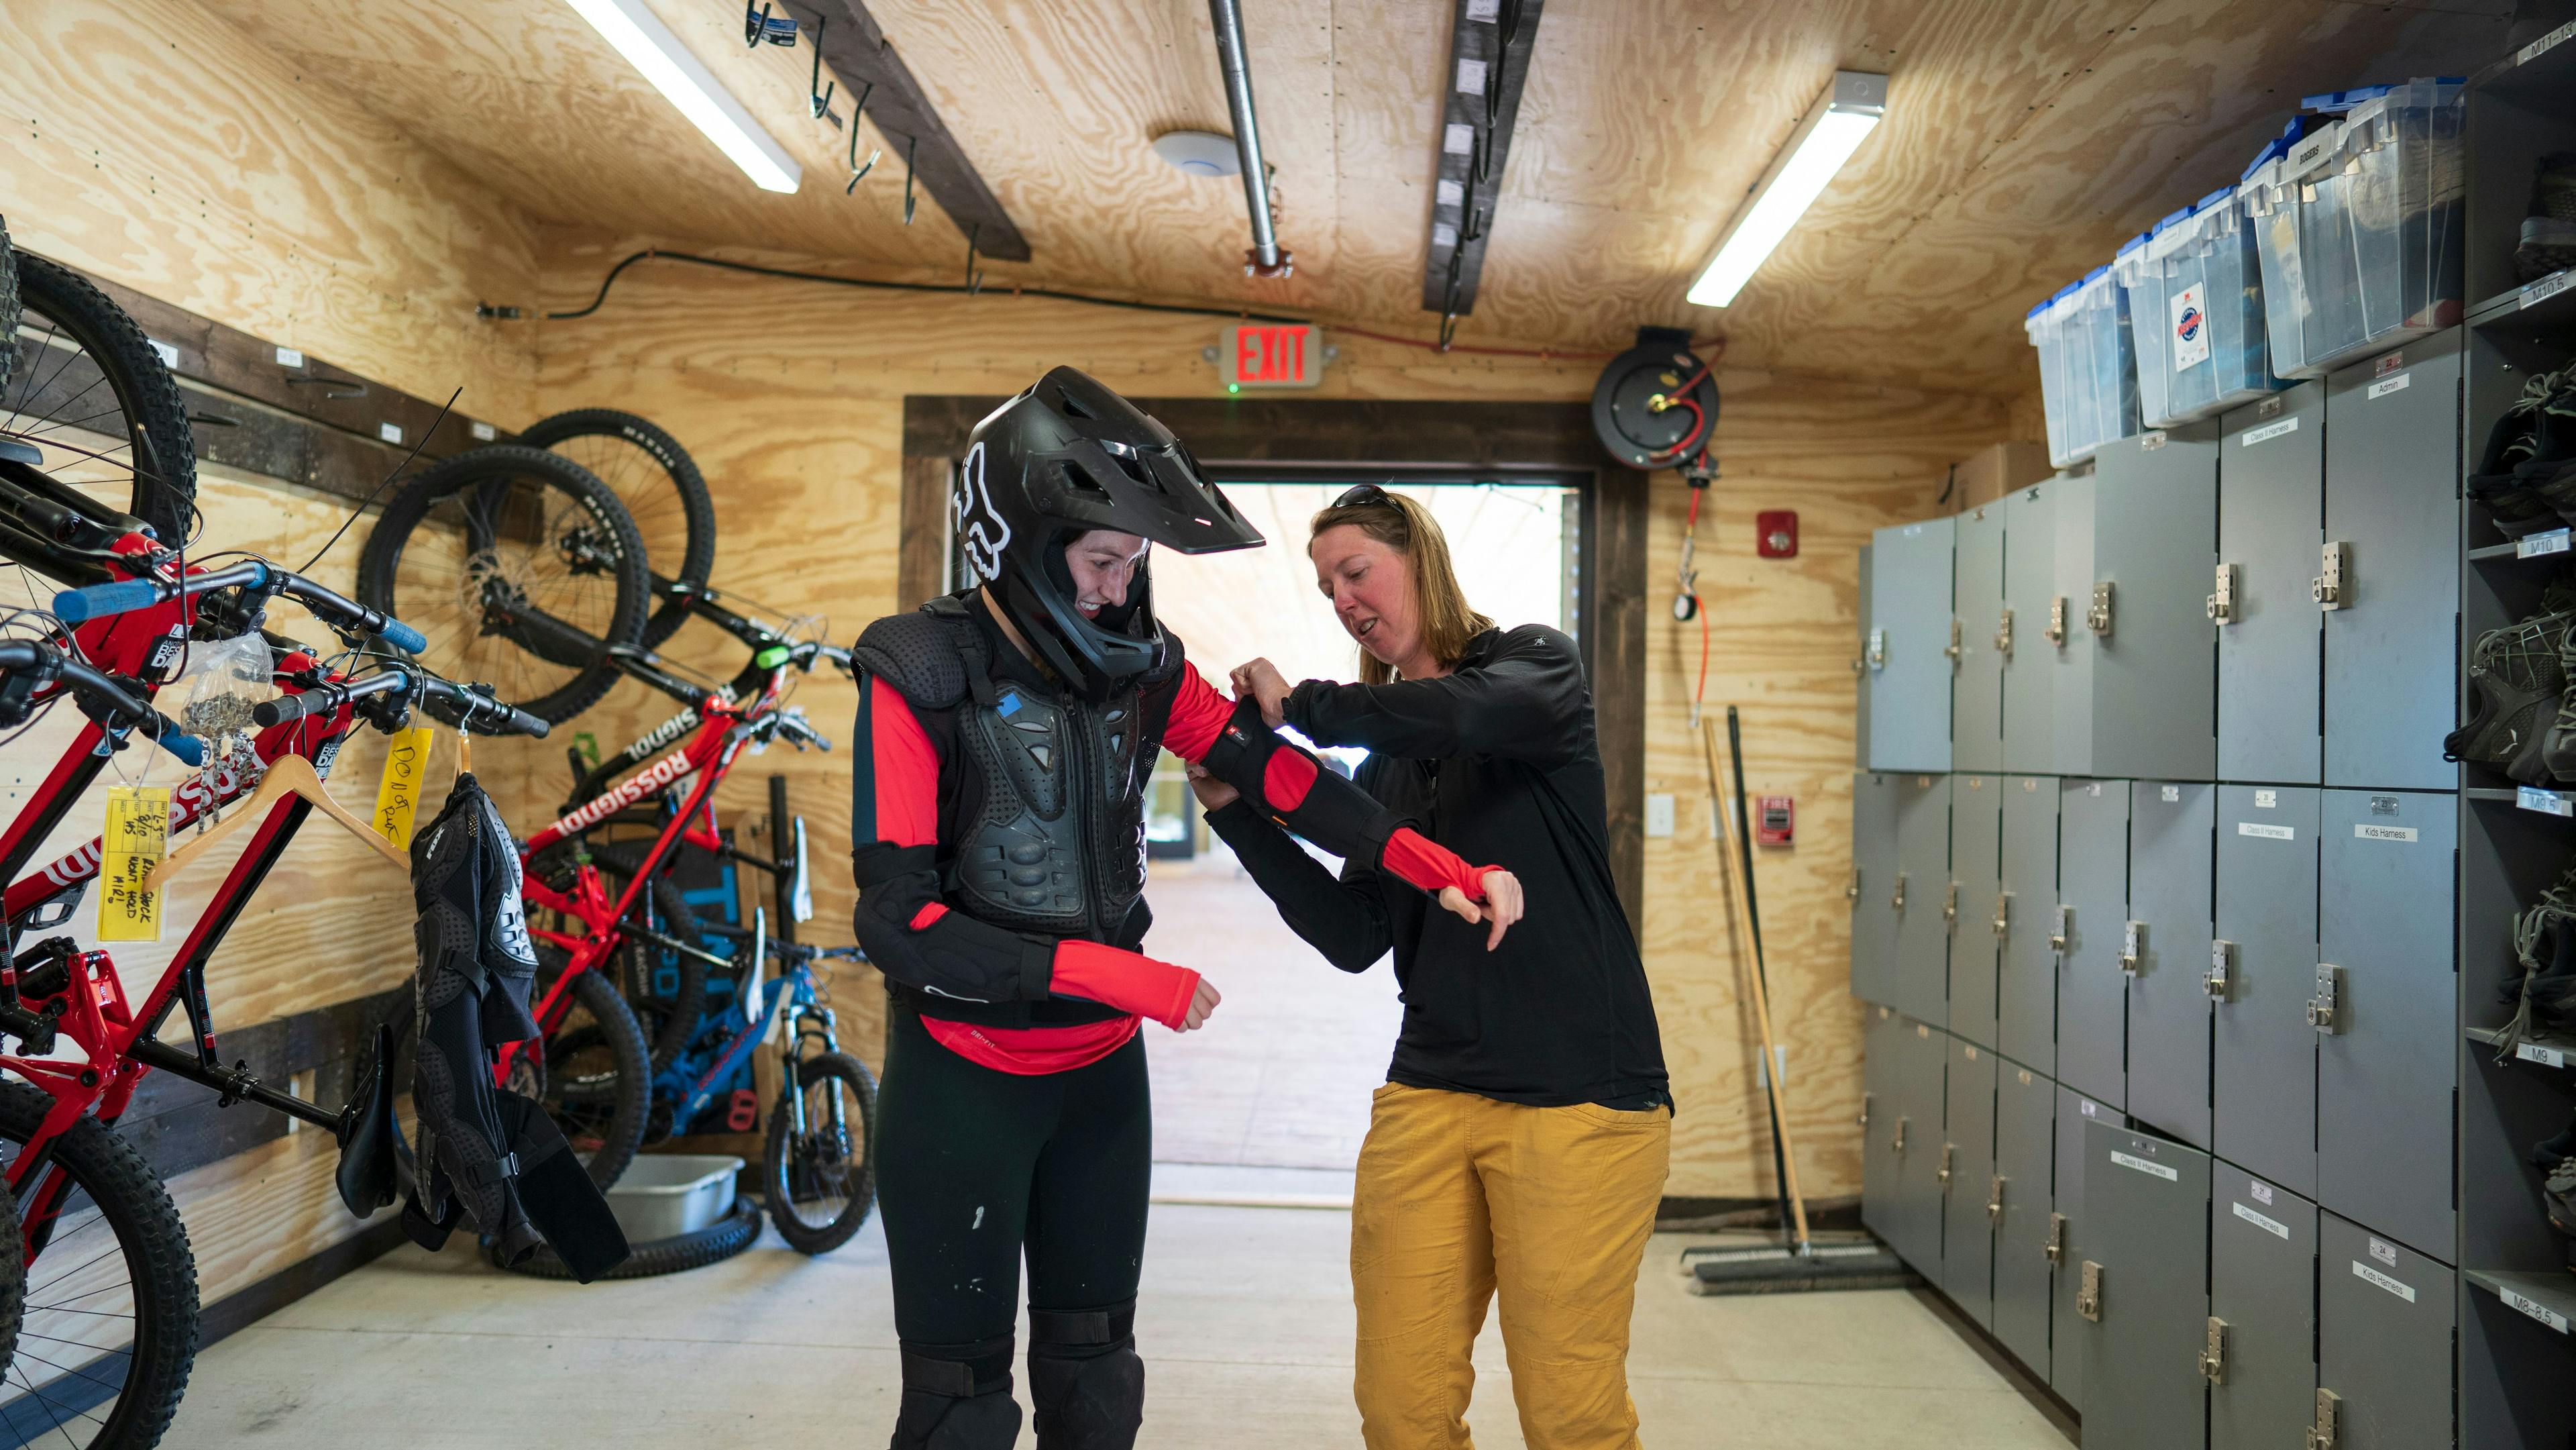 Mountain biker gets suited up with padding at TAOS Ski Valley